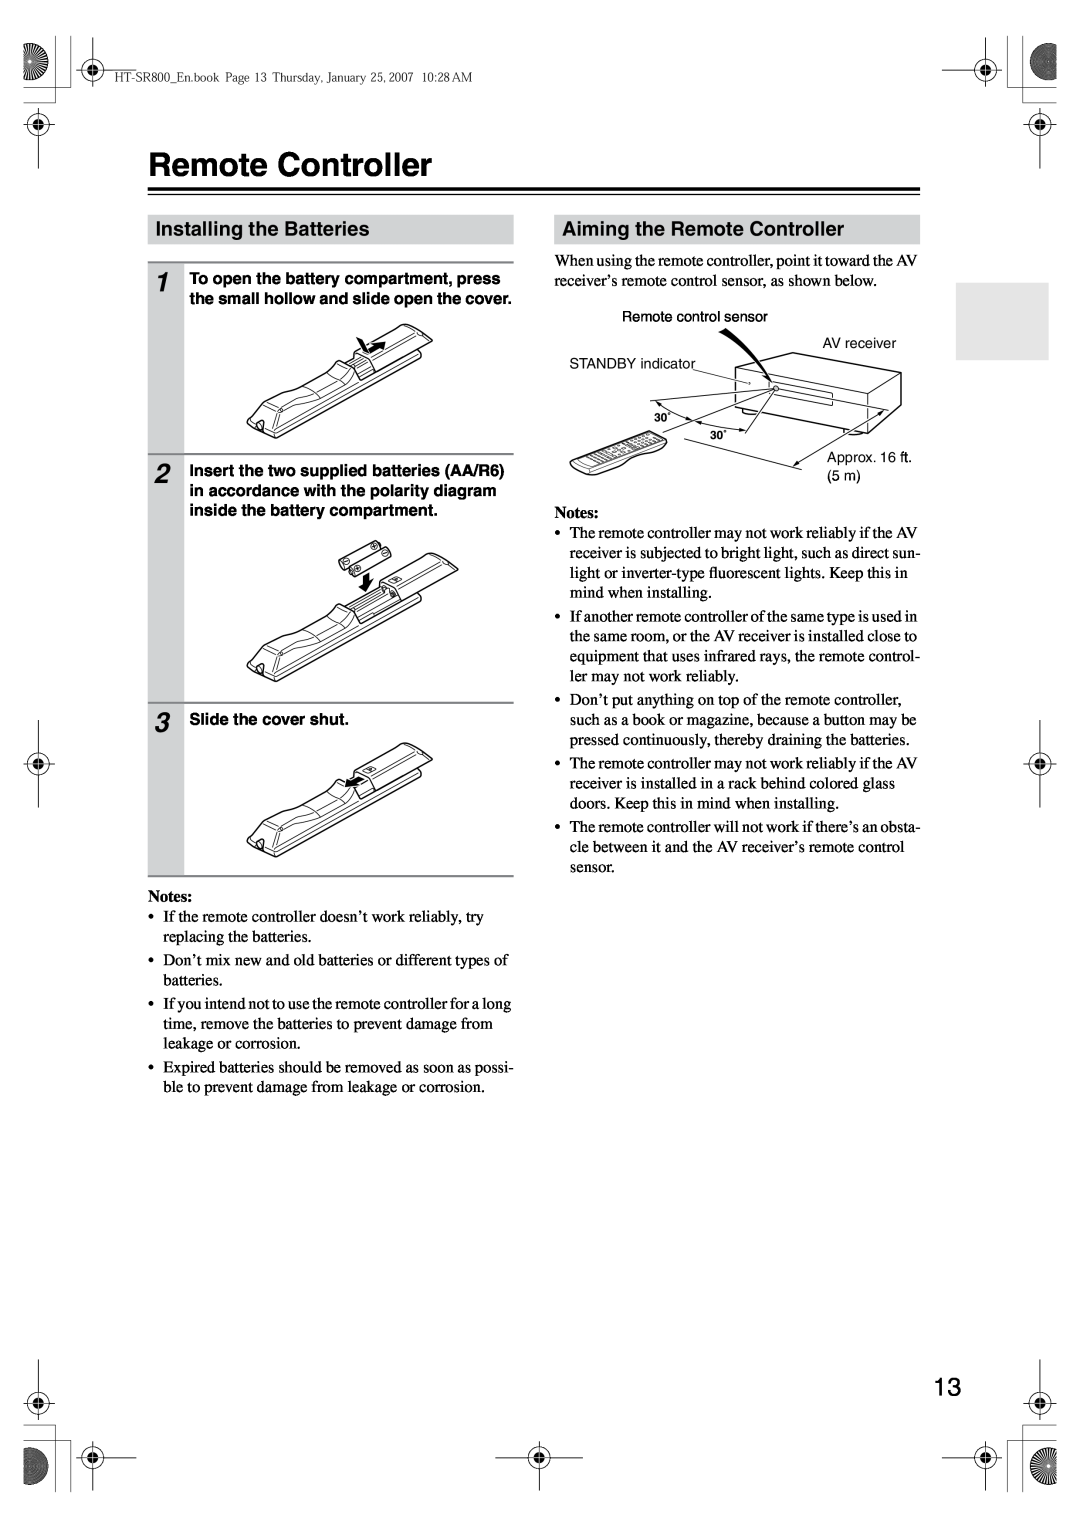 Onkyo HT-SR800 instruction manual Installing the Batteries, Aiming the Remote Controller 